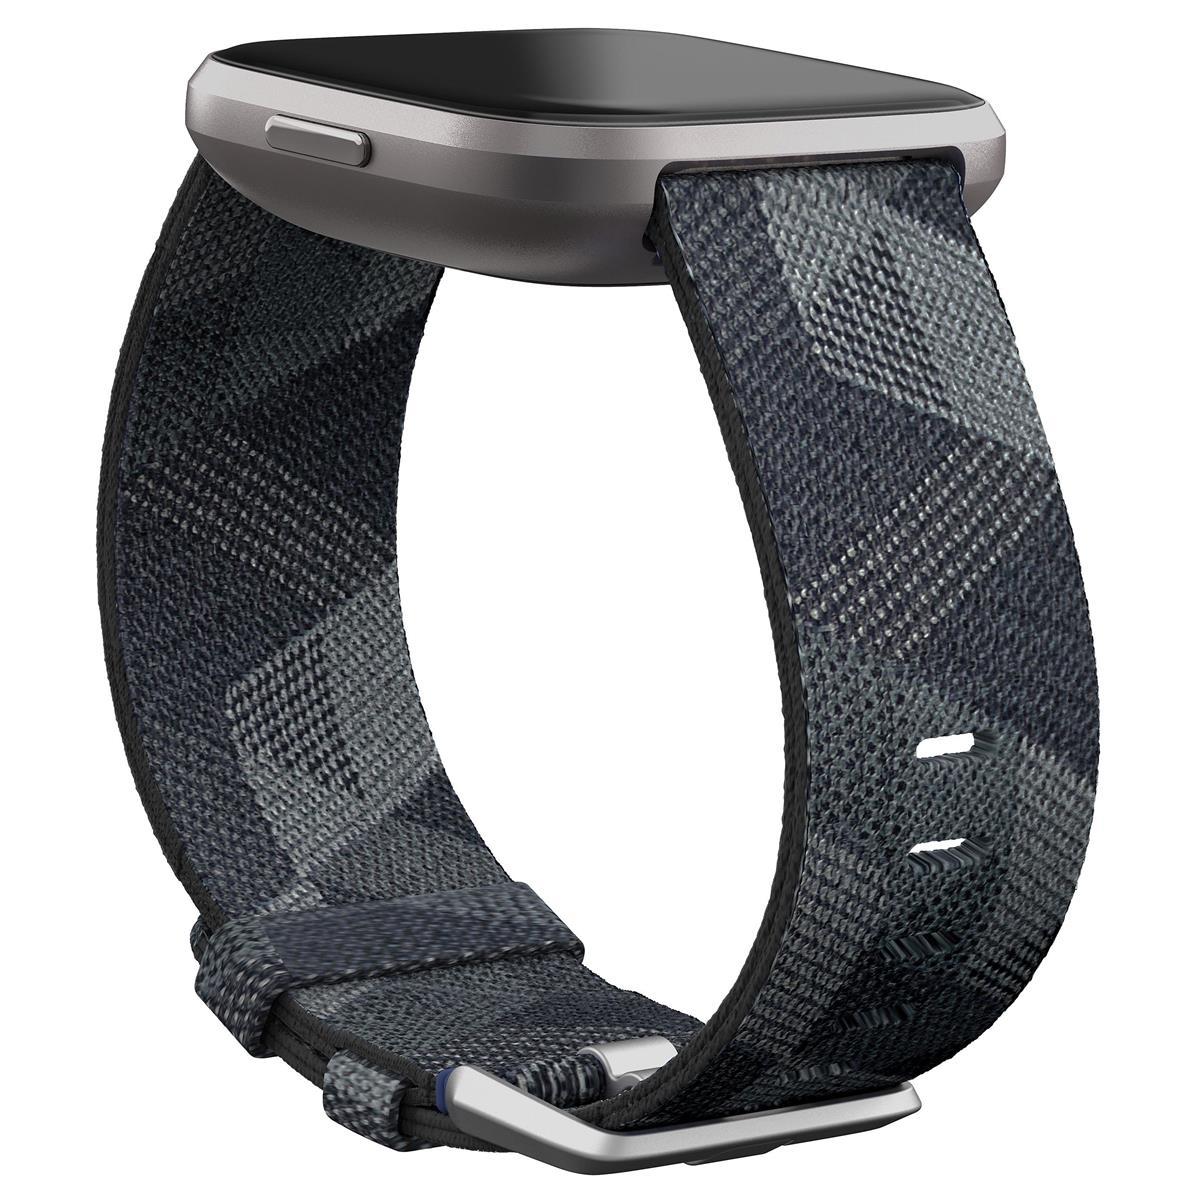 Fitbit Versa 2 Special Edition Health and Fitness Smartwatch Smoke Woven/Mist Gray Aluminum